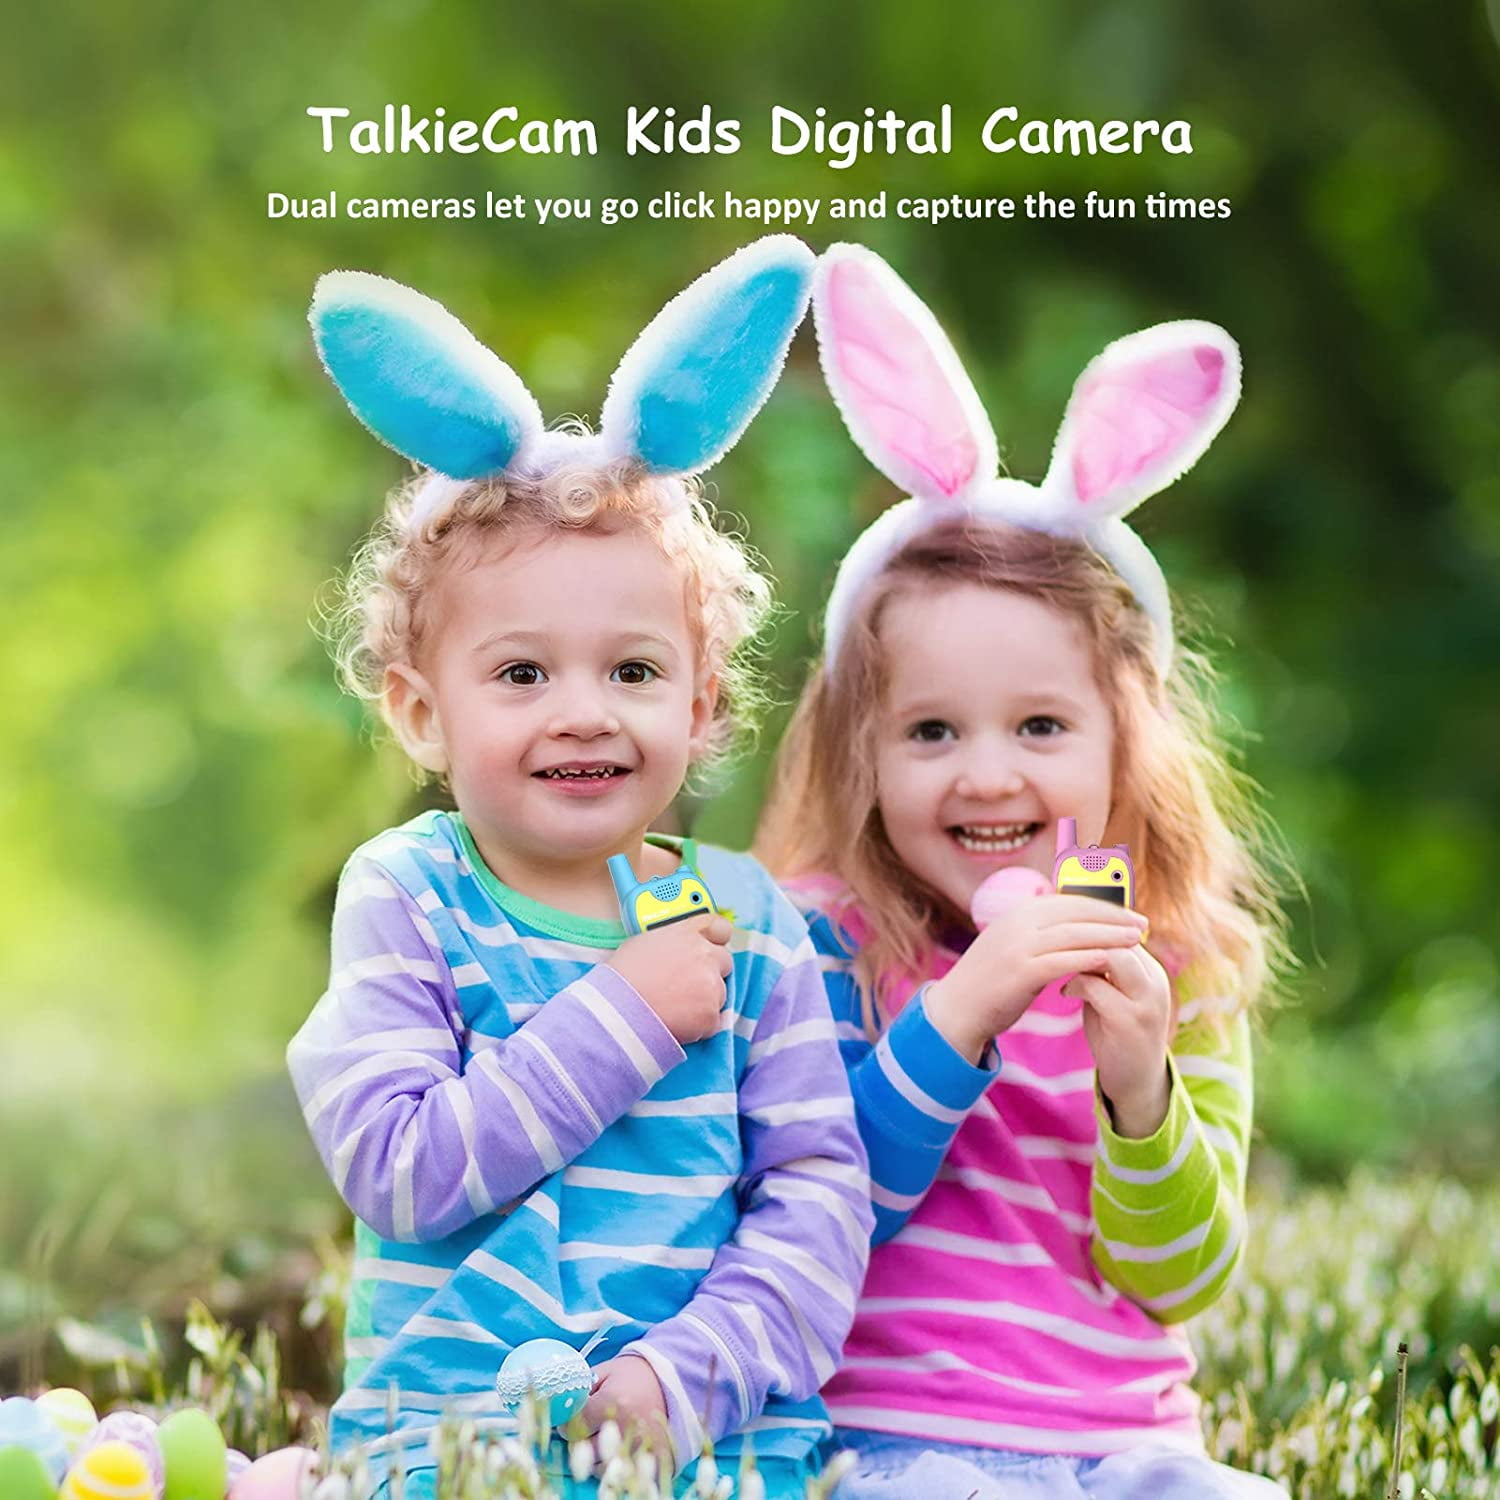 Dragon Touch Walkie Talkies Kids Camera, TalkieCam Multifunctional 1080P  Digital Video Camera Toy with Built-in Games, Backlit LCD, Flashlight for  